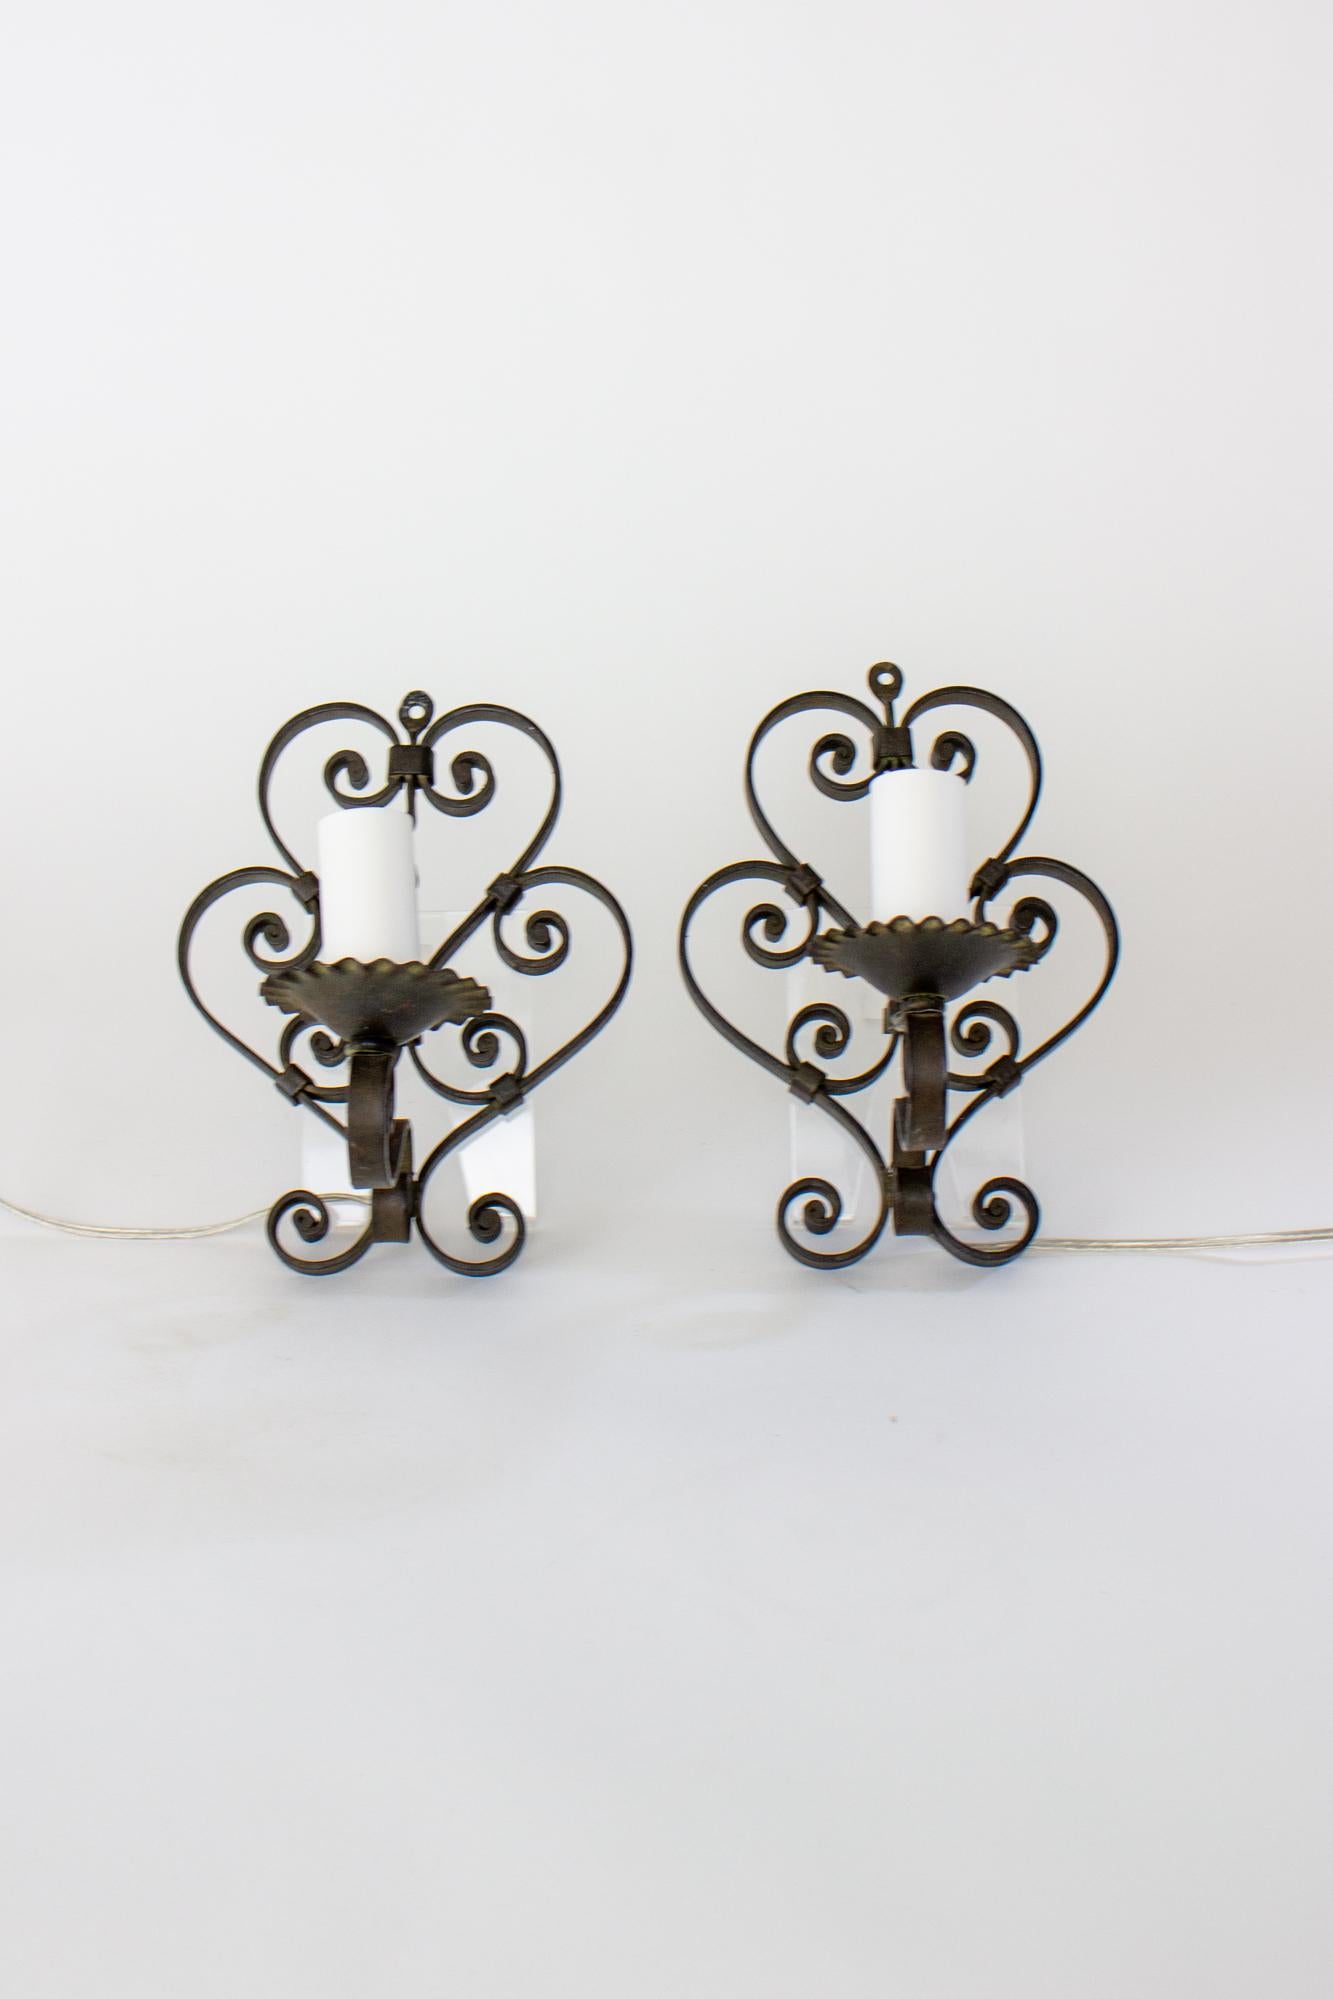 Early 20th century wrought iron pin up sconces. Wrought iron in a double heart design with curved tendrils. Original scalloped bobeche. Instead of closing the open look to enable hard wiring, these are wired to plug in, so they can be hung simply